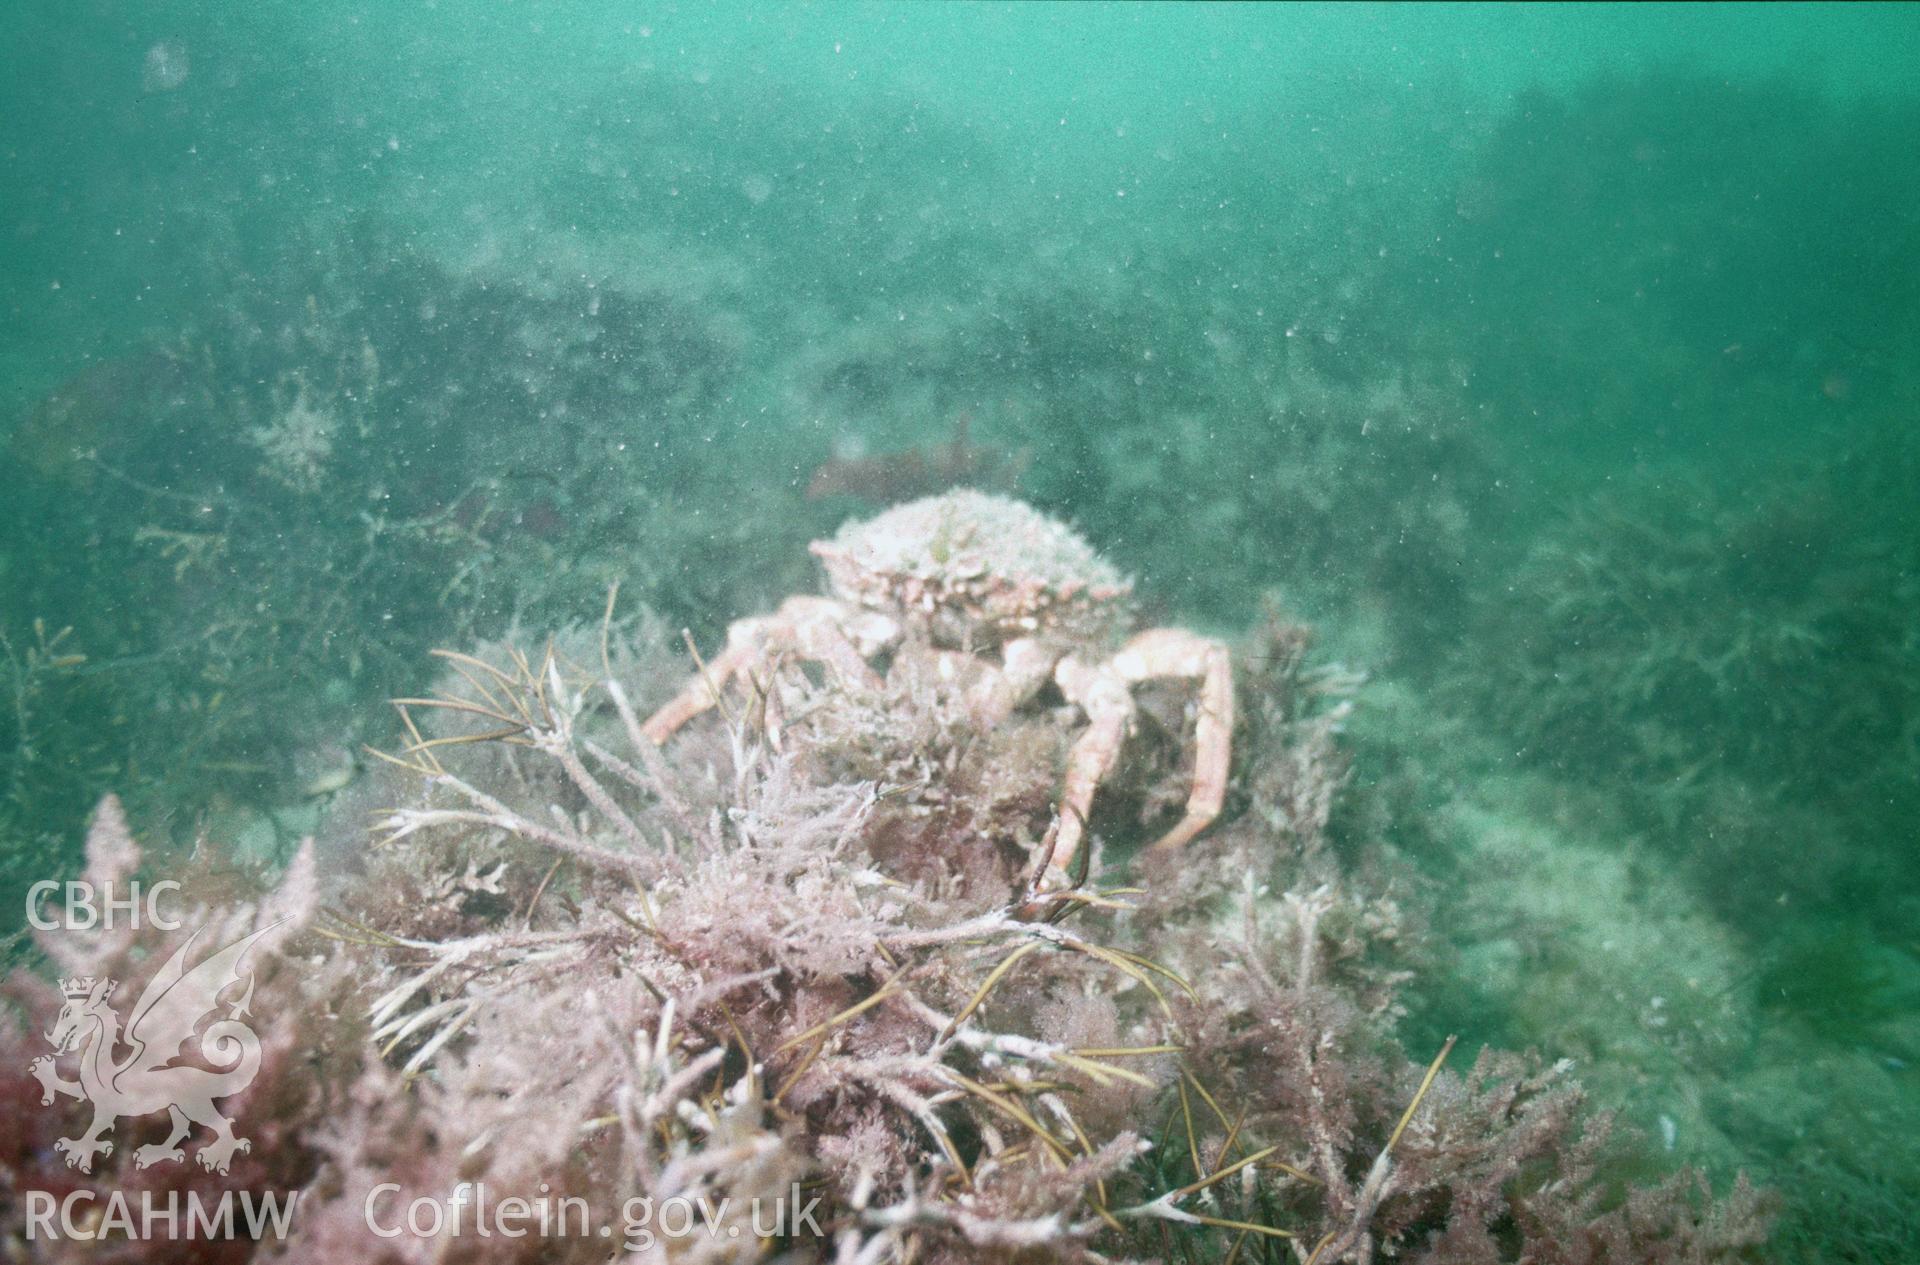 View showing marine life on the wreck site, one of a set of 41 colour slides from an underwater survey of the Tal-y-Bont designated shipwreck, carried out by the Archaeological Diving Unit.